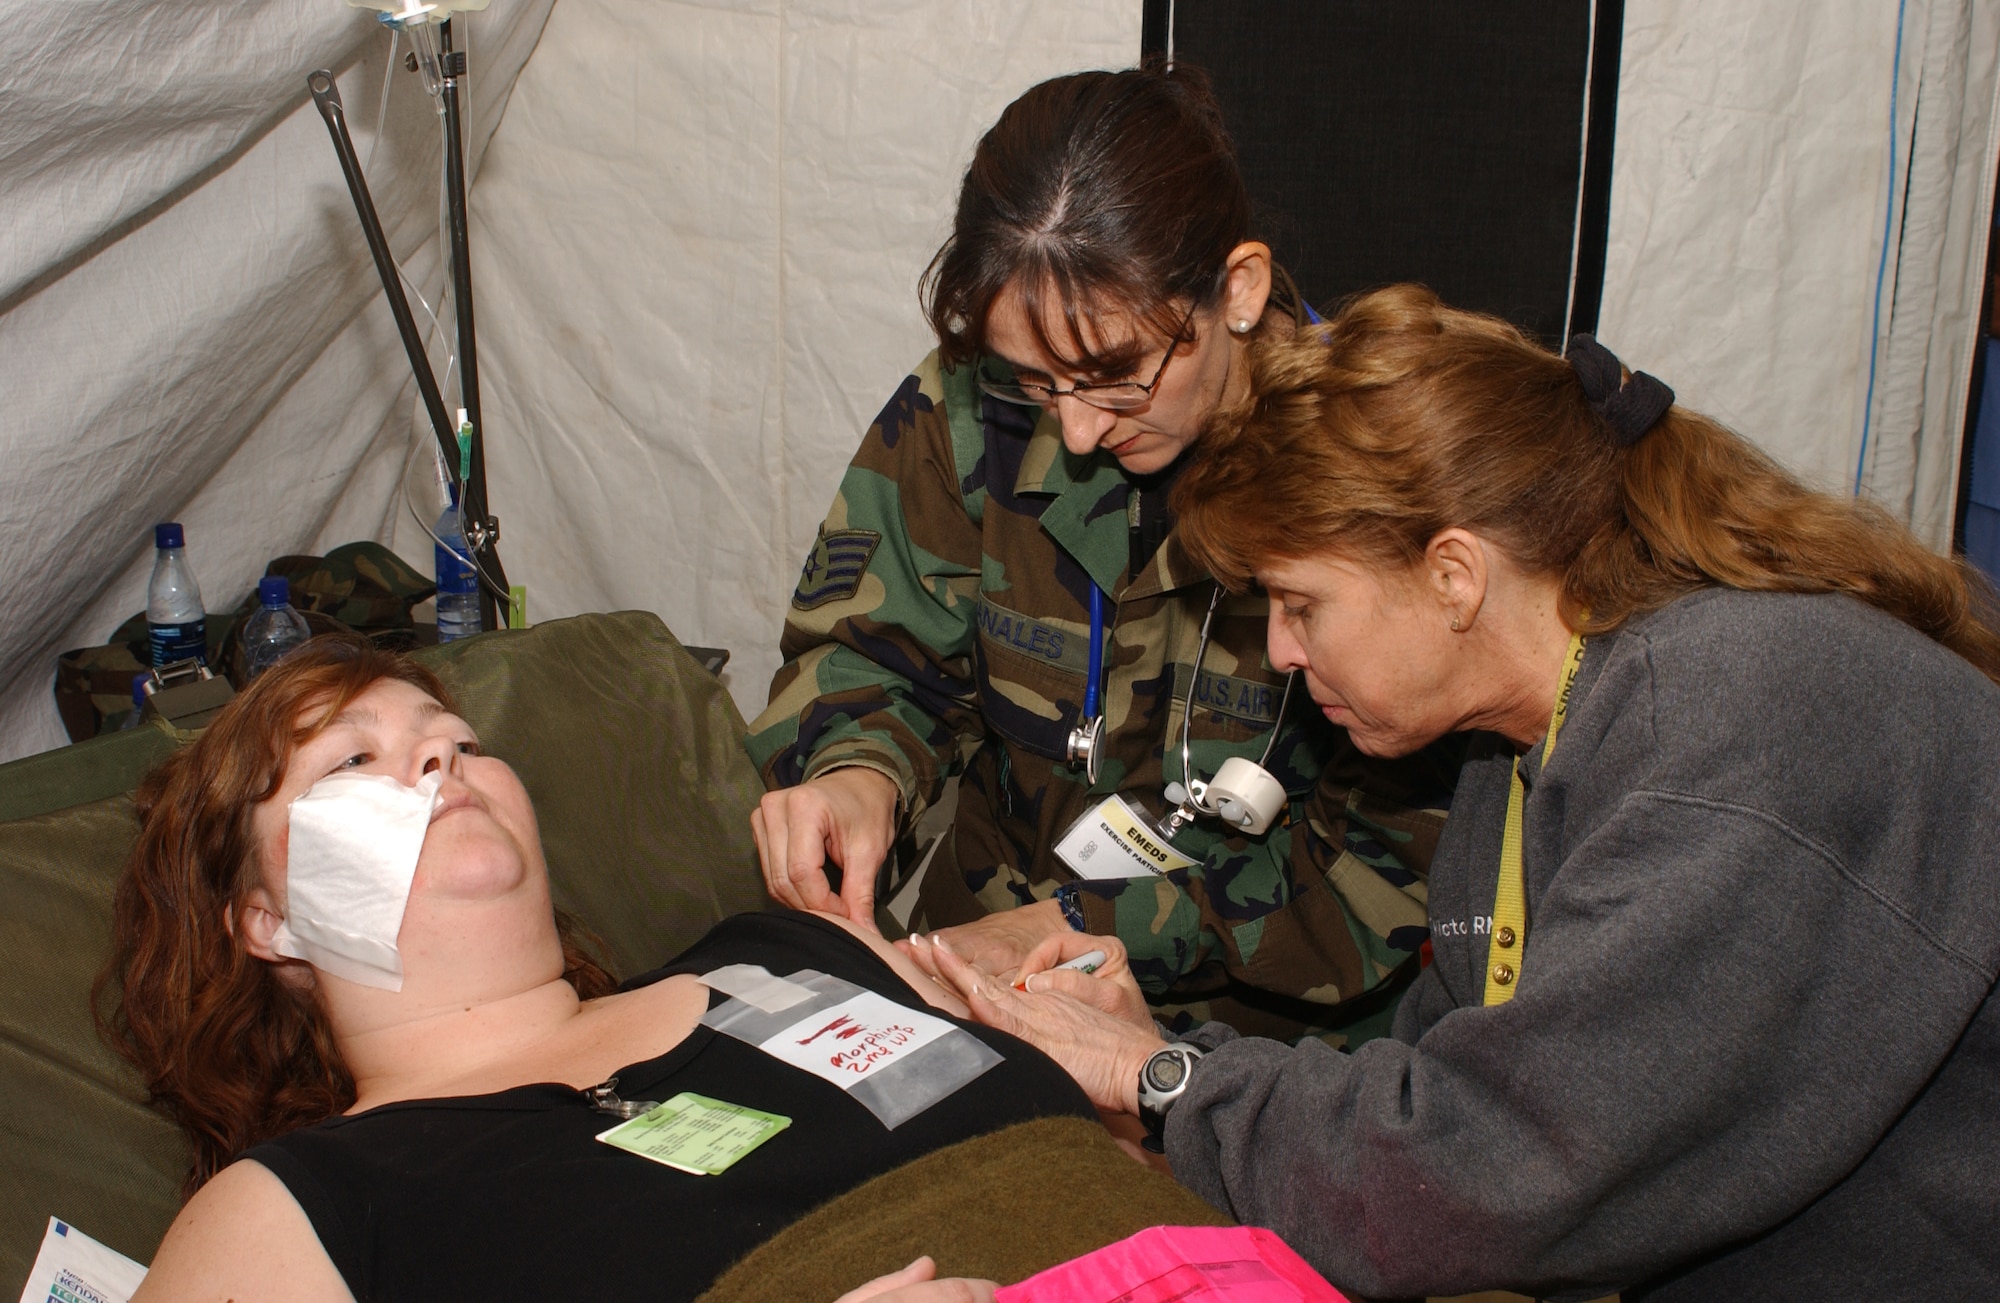 Staff Sgt. Frances Banales, 944th Medical Squadron medical technician, and Victoria Wray, a nurse from the Maricopa Medical Center, treat Amber Ingraham, a simulated patient during the Coyote Crisis Campaign exercise April 26, 2006 in Phoenix. (U.S. Air Force photo/Master Sgt. Garrett McClure) 